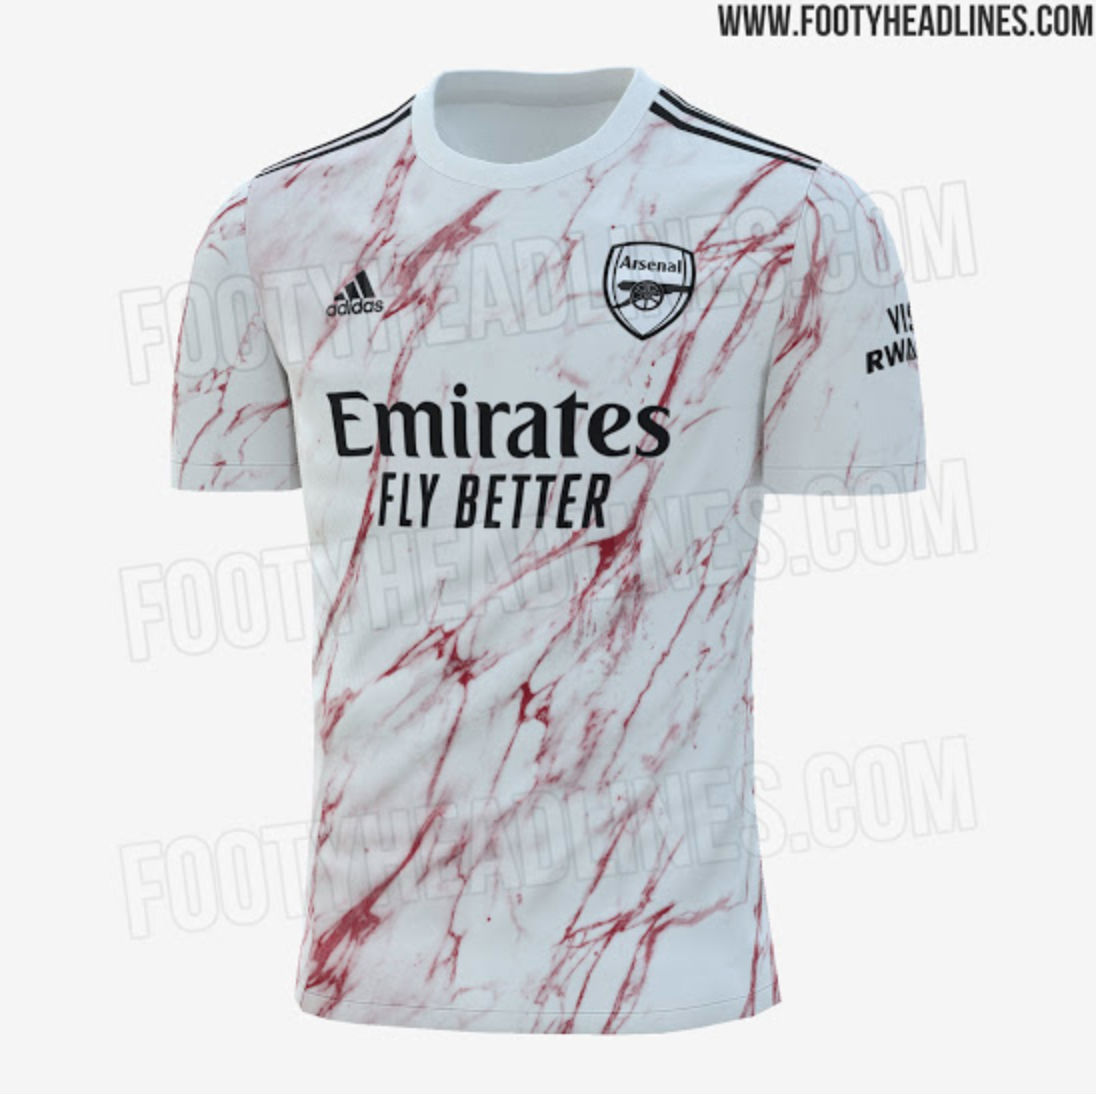 Picture Reported 2020 21 Away Kit Leaked Arseblog News The